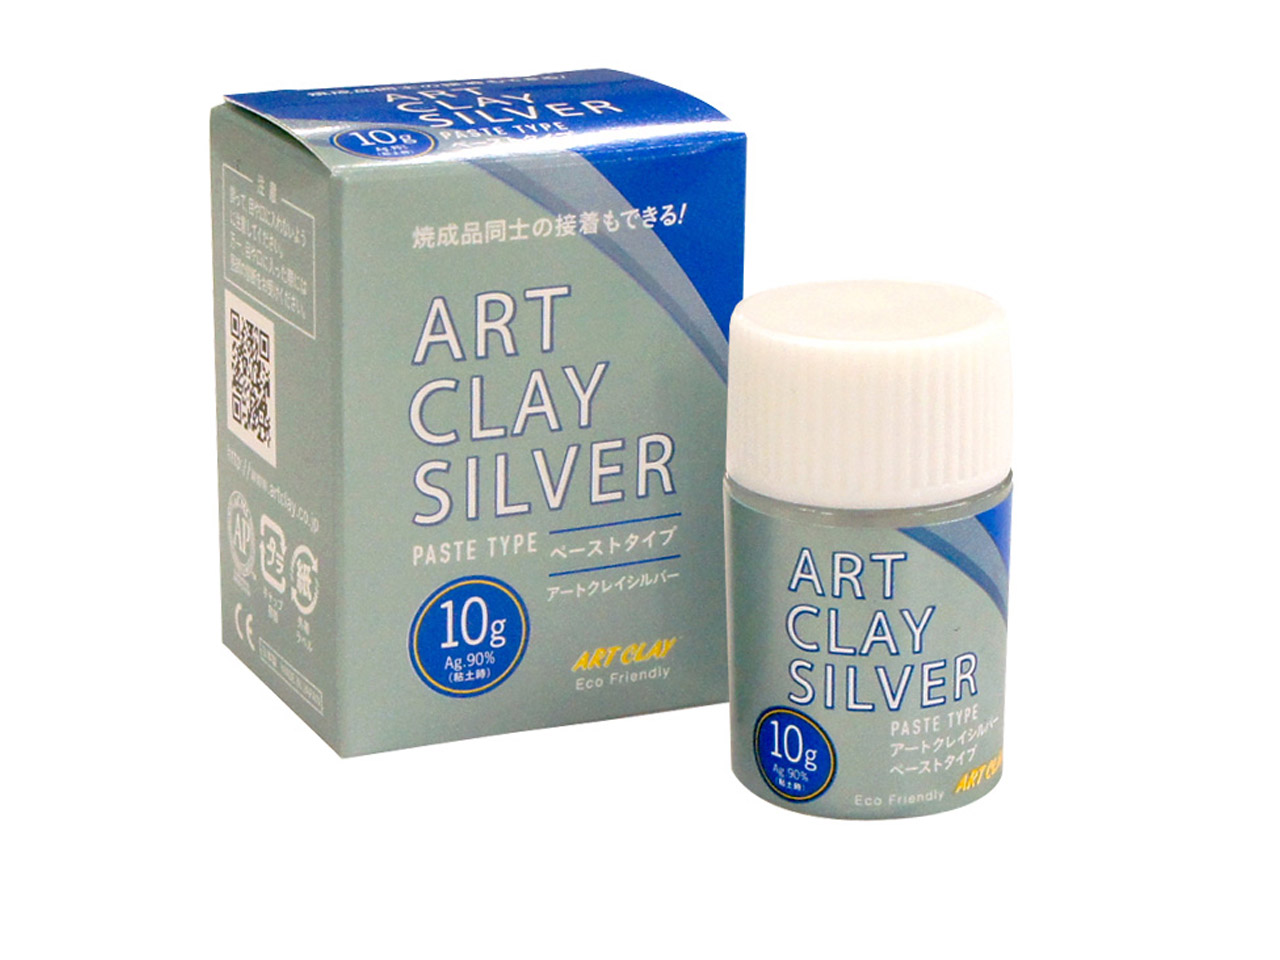 Do you have instructions for Art Clay Silver 10g Paste?